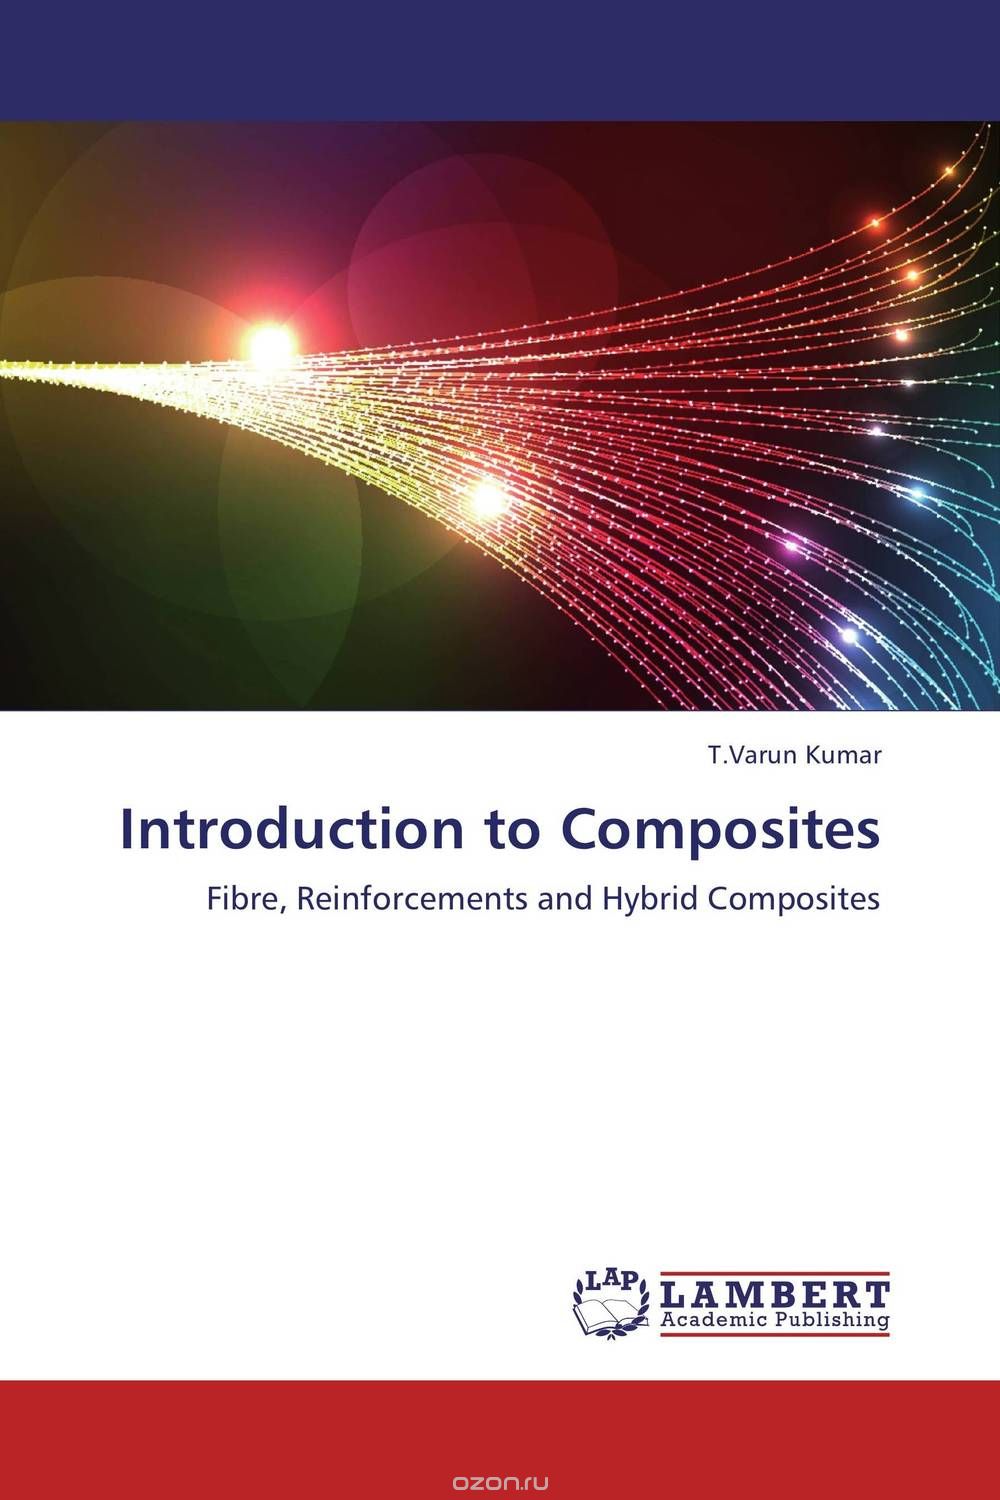 Introduction to Composites